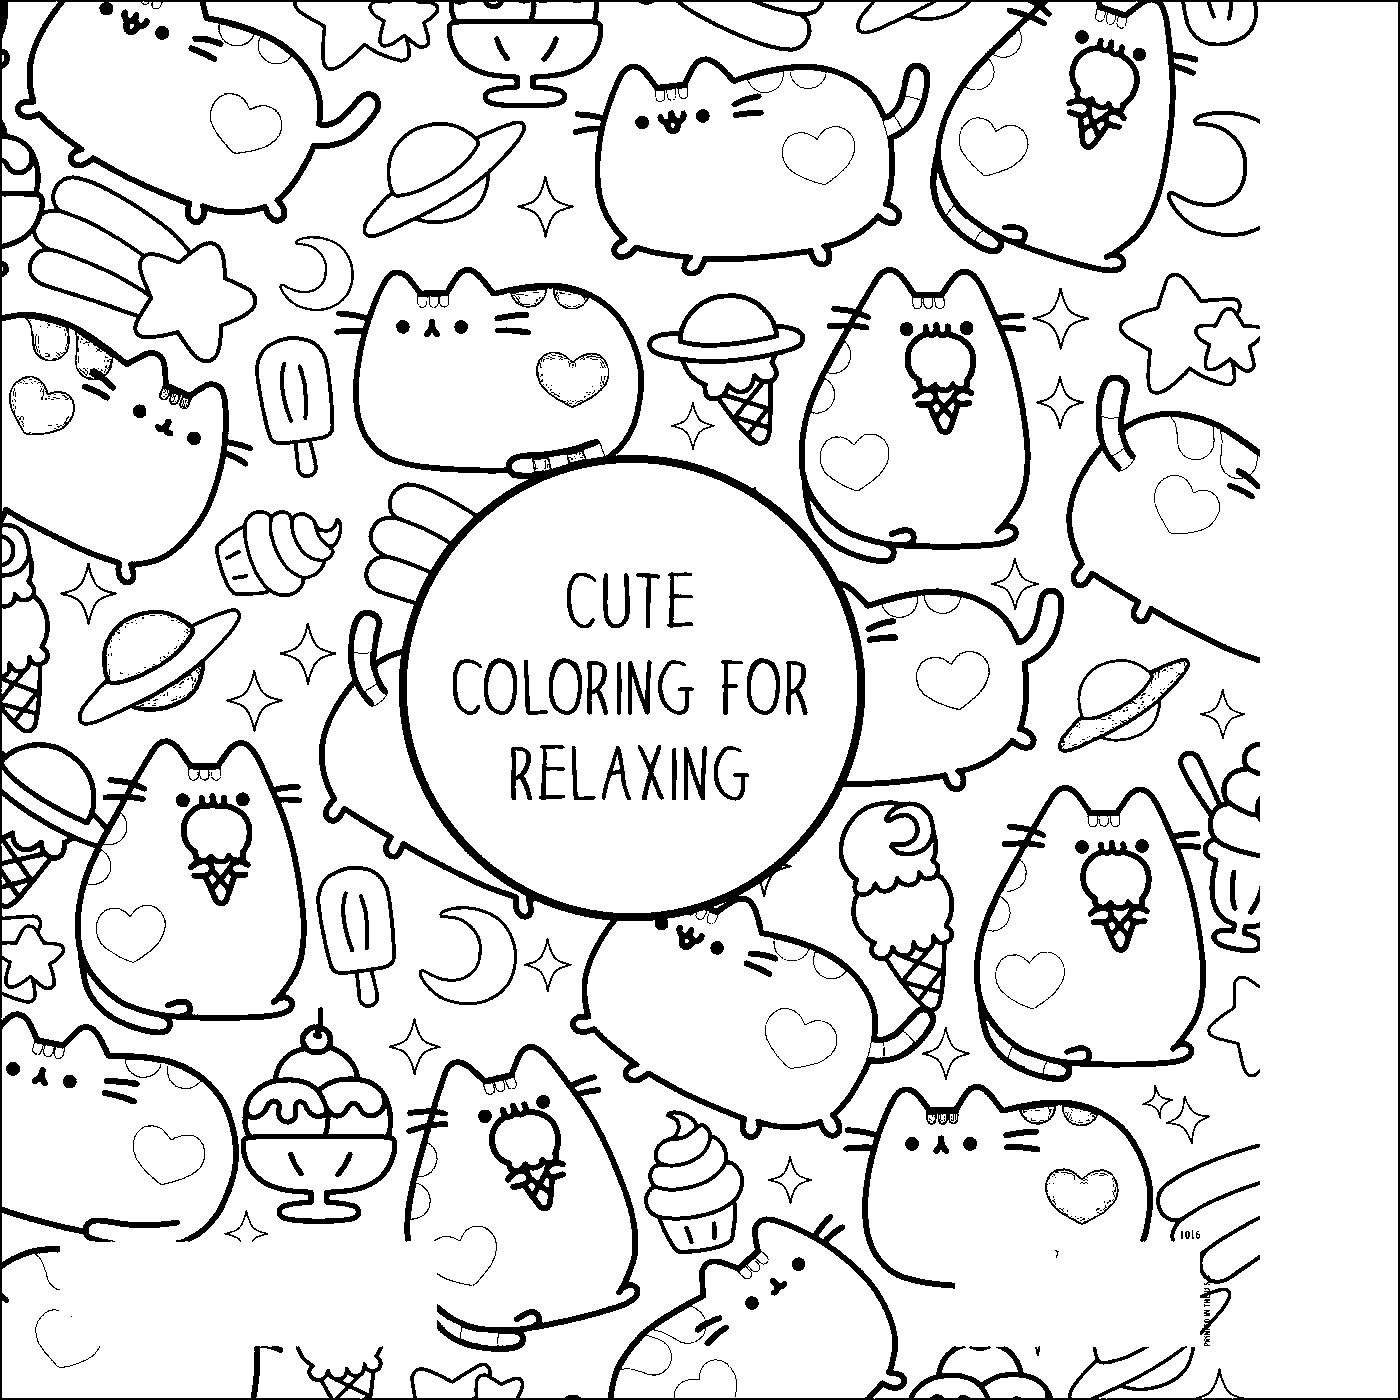 Pusheen Coloring Pages Printable at GetDrawings | Free download